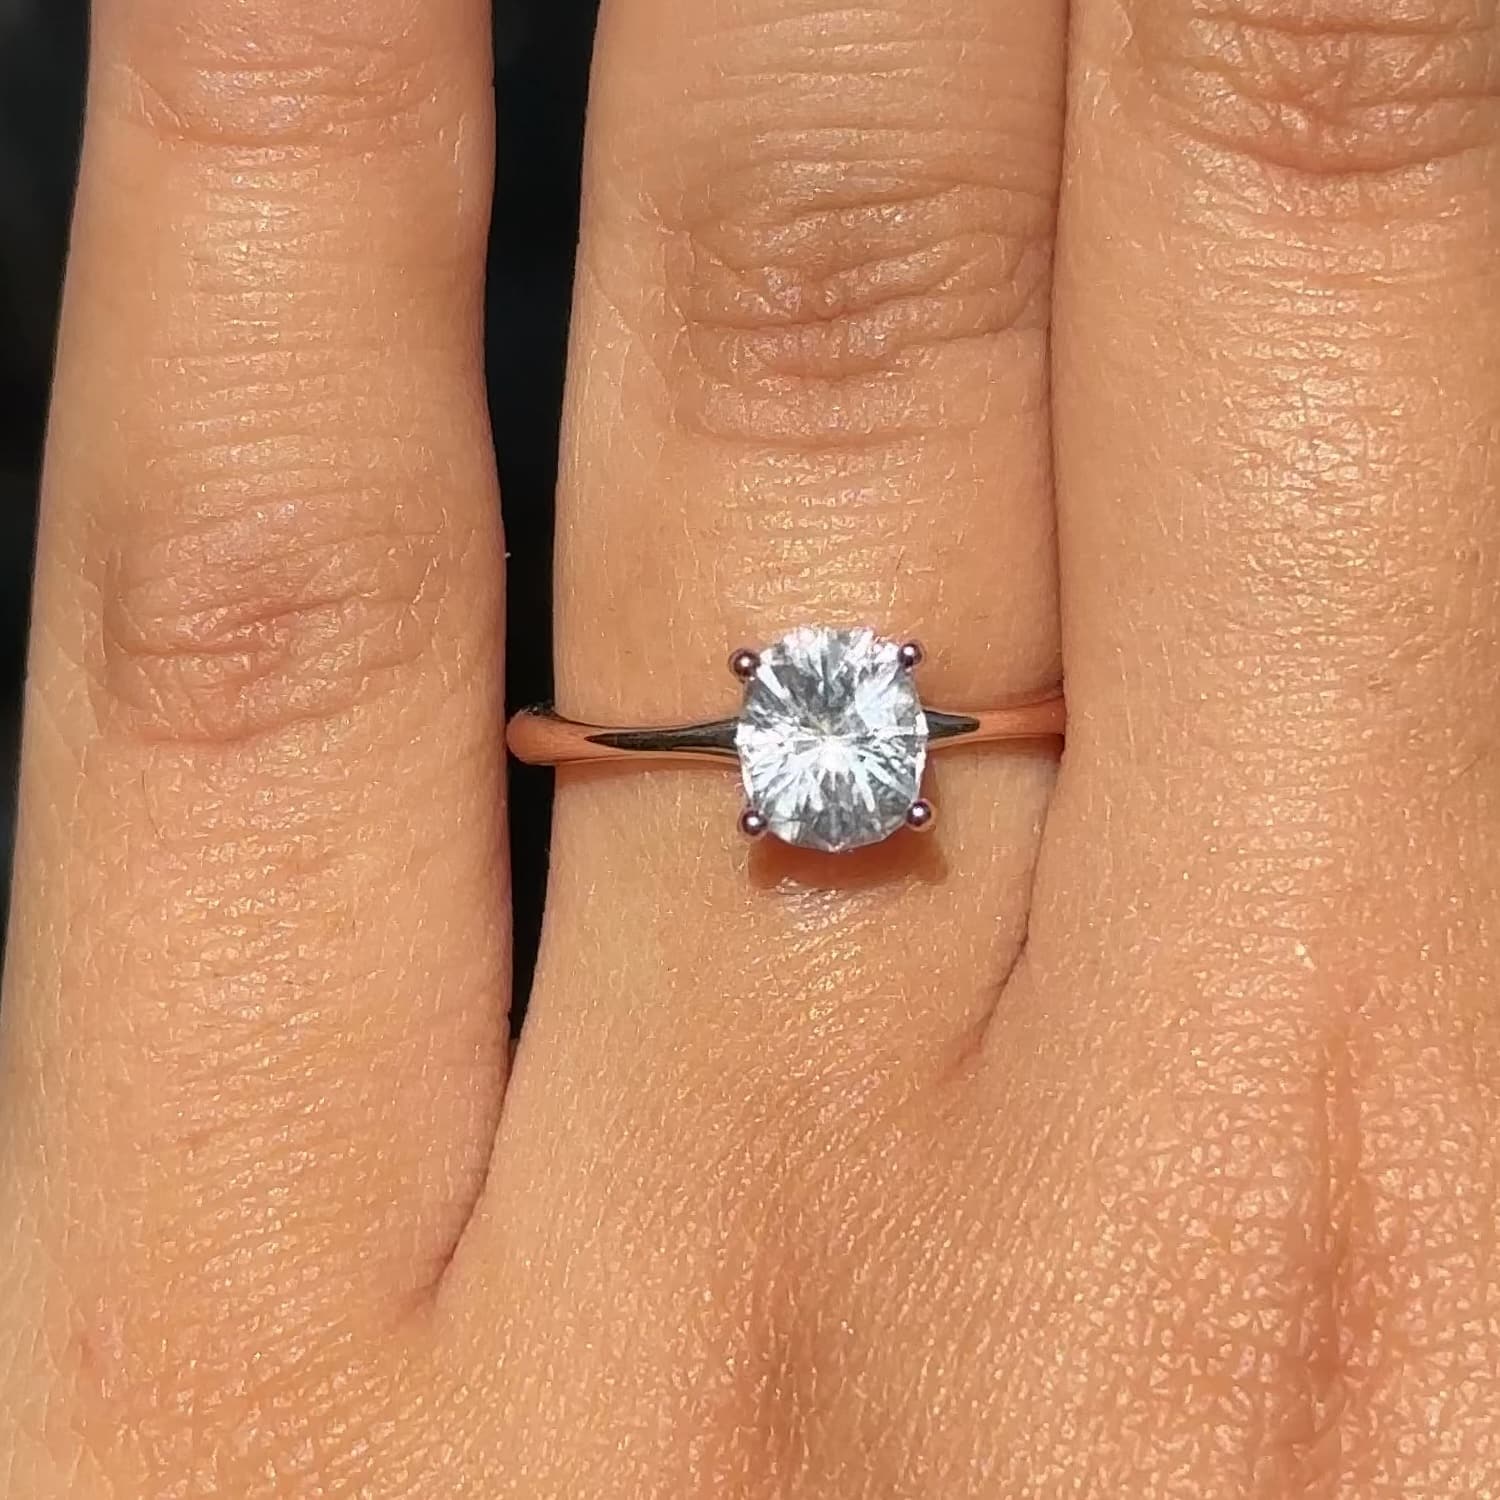 The "Vanessa" ring in 14k rose gold with a 1.37-carat Montana sapphire